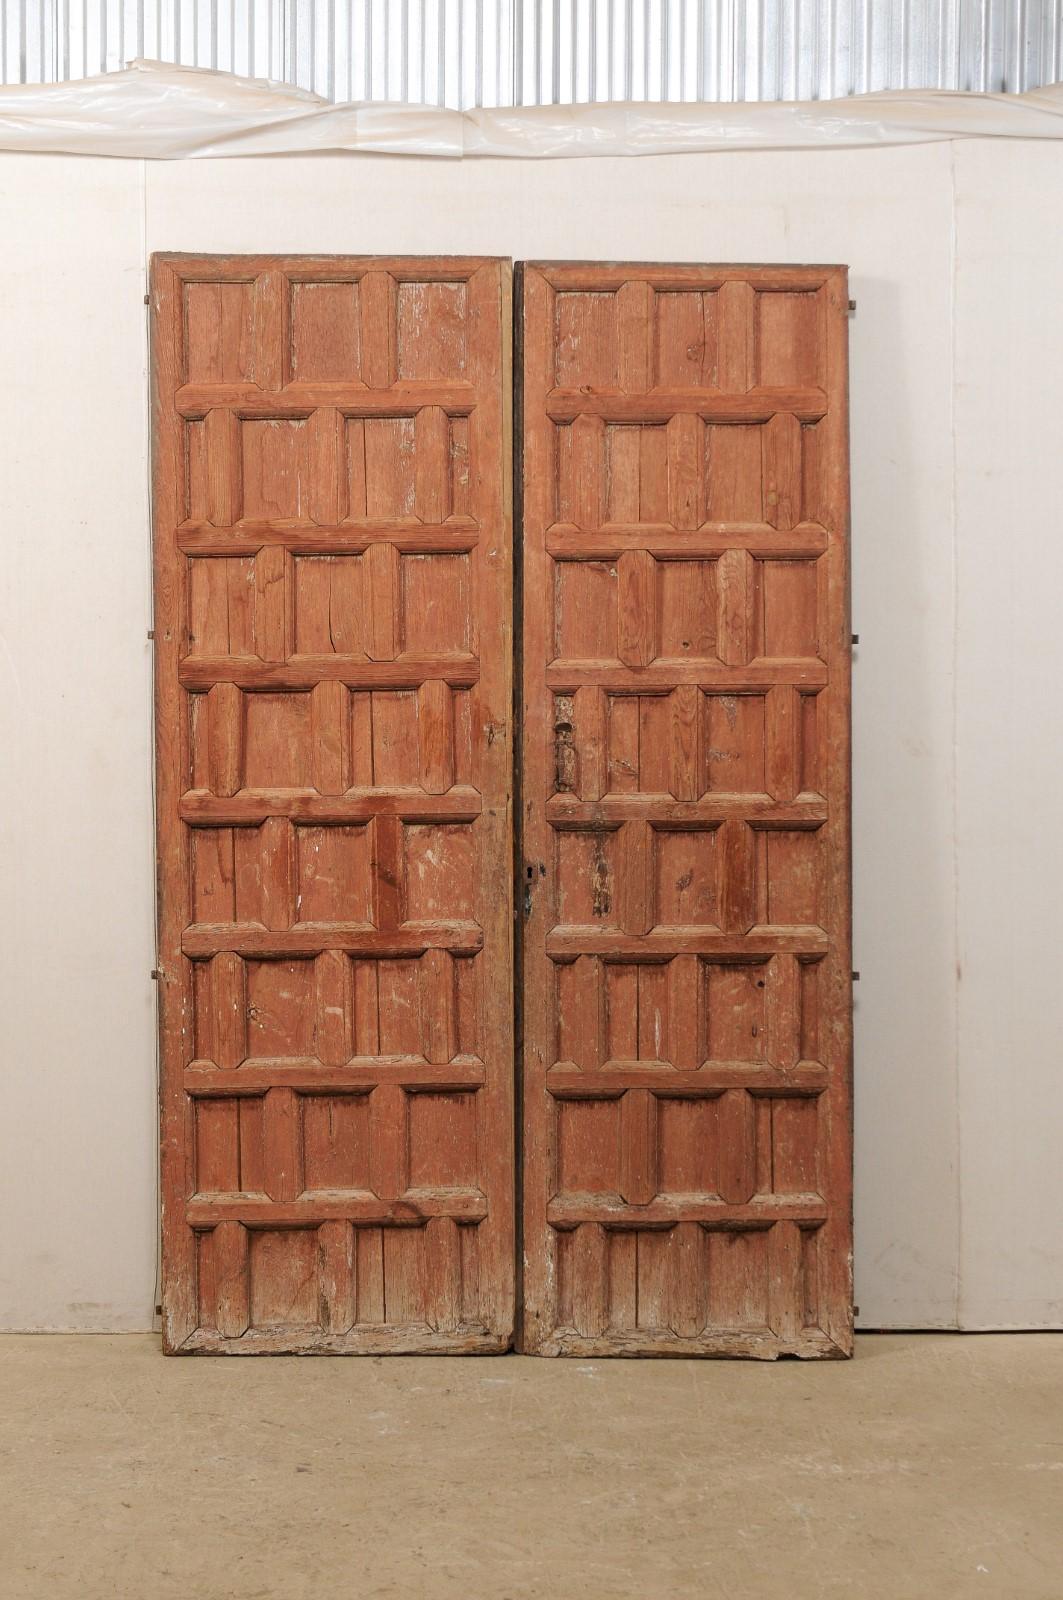 A Spanish pair of tall decoratively paneled doors from the turn of the 18th and 19th century. This antique pair of doors from Spain have been designed with thickly carved rows of staggered rectangular panels throughout their fronts sides, and have